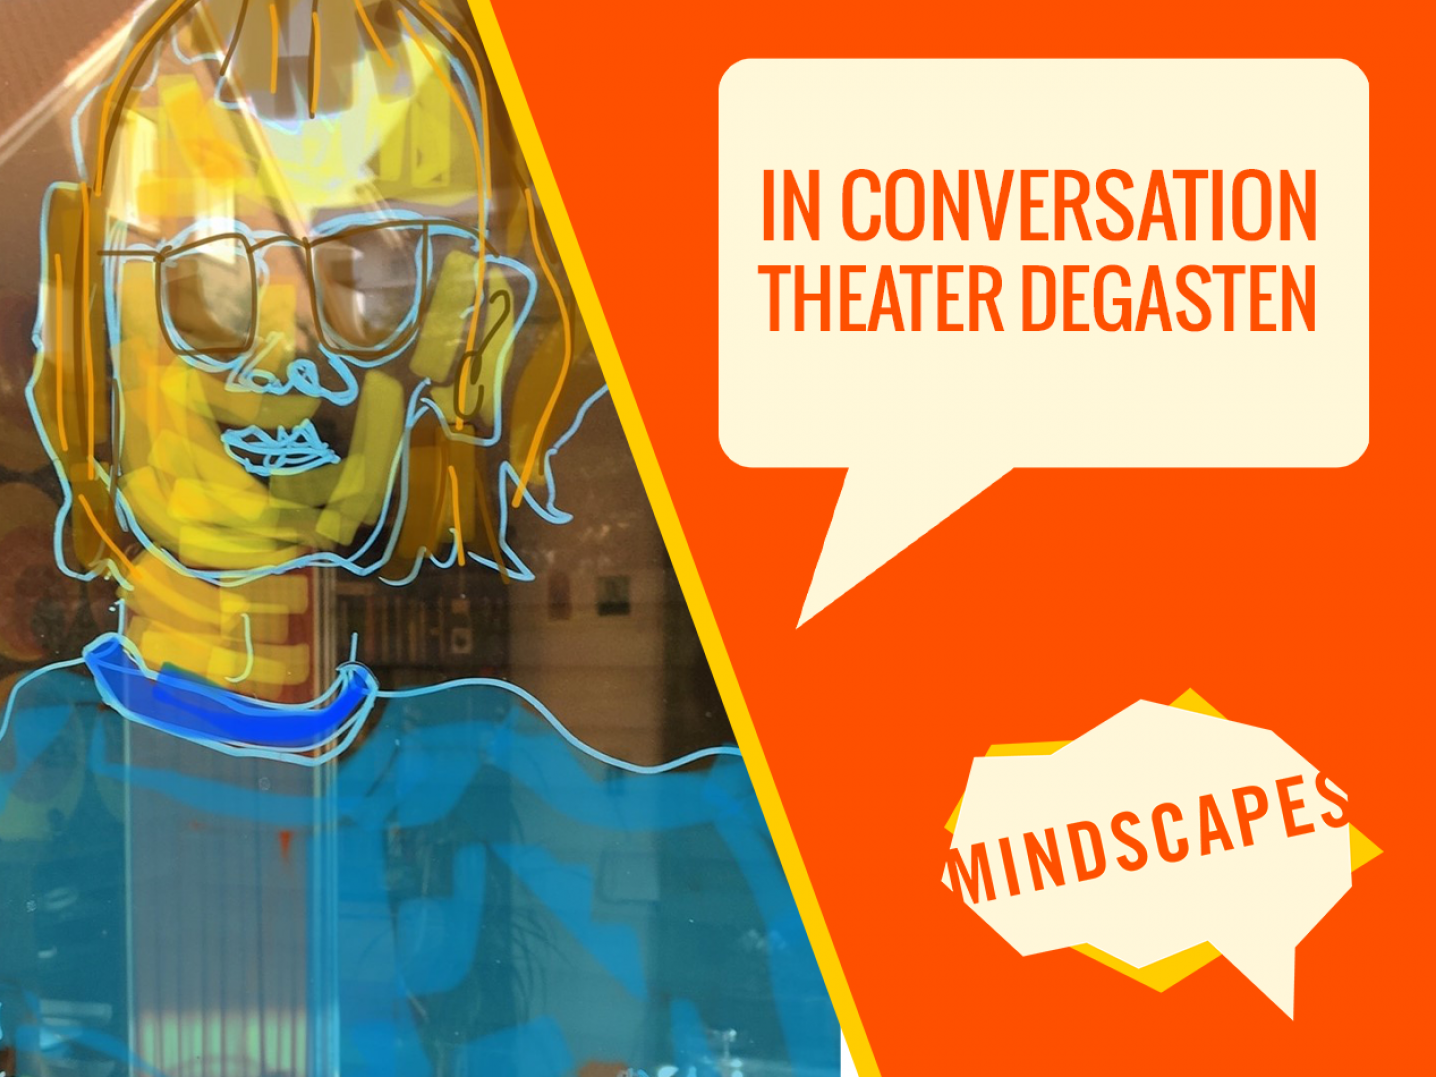 MINDSCAPES: In conversation with Theater DEGASTEN 